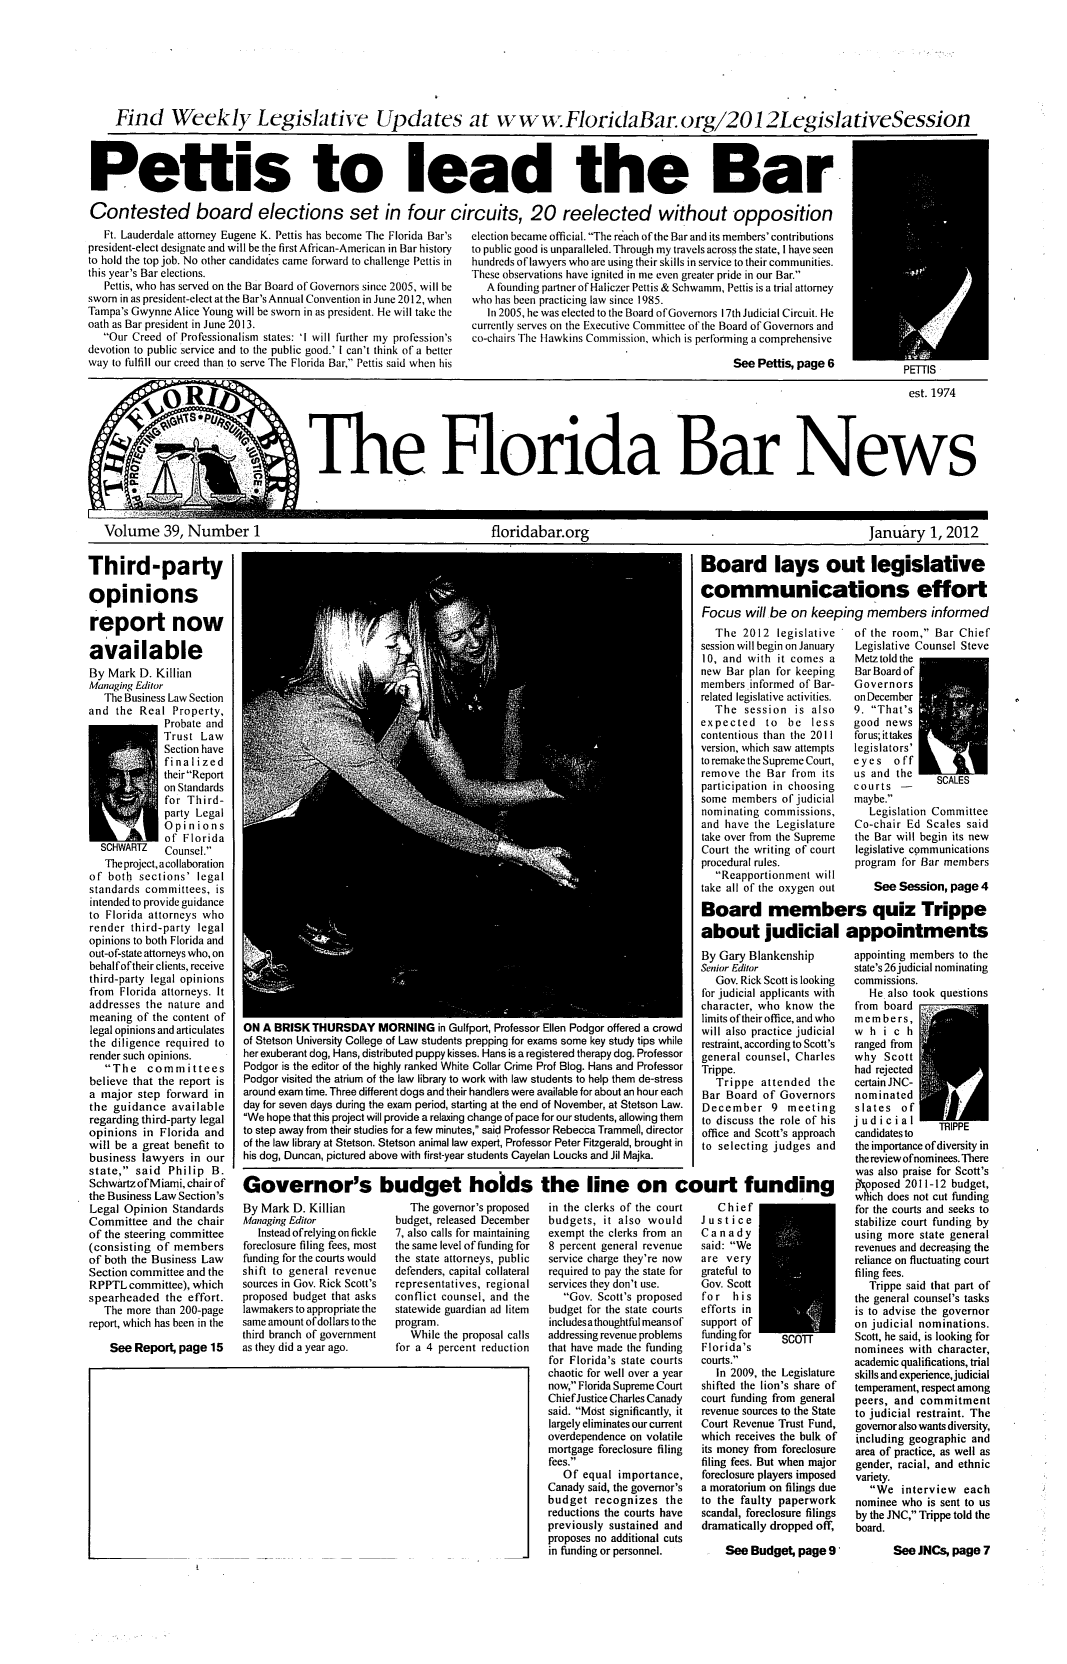 handle is hein.barjournals/flabn0039 and id is 1 raw text is: 







Find Weekly Legishative Updates at wwvw:FloridaBai: org/201 2LegislativeSession


Peftis to lead the Bar

Contested board elections set in four circuits, 20 reelected without opposition


   Ft. Lauderdale attorney Eugene K. Pettis has become The Florida Bar's
president-elect designate and will be the first African-American in Bar history
to hold the top job. No other candidates came forward to challenge Pettis in
this year's Bar elections.
   Pettis, who has served on the Bar Board of Governors since 2005, will be
sworn in as president-elect at the Bar's Annual Convention in June 2012, when
Tampa's Gwynne Alice Young will be sworn in as president. He will take the
oath as Bar president in June 2013.
   Our Creed of Professionalism states: 'I will further my profession's
devotion to public service and to the public good.' I can't think of a better
way to fulfill our creed than to serve The Florida Bar, Pettis said when his


election became official. The reach of the Bar and its members' contributions
to public good is unparalleled. Through my travels across the state, I have seen
hundreds of lawyers who are using their skills in service to their communities.
These observations have ignited in me even greater pride in our Bar.
   A founding partner of Haliczer Pettis & Schwamm, Pettis is a trial attorney
who has been practicing law since 1985.
   In 2005, he was elected to the Board ofGovernors 17th Judicial Circuit. He
currently serves on the Executive Committee of the Board of Governors and
co-chairs The Itawkins Commission, which is perlorming a comprehensive

                                               See Pettis, page 6


                                                                                                                                                est. 1974





                                    The Florida Bar News




Volume 39, Number 1                                                  floridabar.org                                                      January 1, 2012


Third-party

opinions

report now

available
By Mark D. Killian
Managing Editor
   The Business Law Section
and the Real Property,
              Probate and
              Trust Law
              Section have
              finalized
              their Report
              on Standards
              for Third-
              party Legal
              Opinions
              of Florida
  SCHWARTZ    Counsel.
  The project, a collaboration
of both sections' legal
standards committees, is
intended to provide guidance
to Florida attorneys who
render third-party legal
opinions to both Florida and
out-of-state attorneys who, on
behalfoftheir clients, receive
third-party legal opinions
from Florida attorneys. It
addresses the nature and
meaning of the content of
legal opinions and articulates
the diligence required to
render such opinions.
   The committees
believe that the report is
a major step forward in
the guidance available
regarding third-party legal
opinions in Florida and
will be a great benefit to
business lawyers in our
state, said Philip B.
Schwartz ofMiami, chair of
the Business Law Section's
Legal Opinion Standards
Committee and the chair
of the steering committee
(consisting of members
of both the Business Law
Section committee and the
RPPTL committee), which
spearheaded the effort.
   The more than 200-page
report, which has been in the

    See Report, page 15


ON A BRISK THURSDAY MORNING in Gulfport, Professor Ellen Podgor offered a crowd
of Stetson University College of Law students prepping for exams some key study tips while
her exuberant dog, Hans, distributed puppy kisses. Hans is a registered therapy dog. Professor
Podgor is the editor of the highly ranked White Collar Crime Prof Blog. Hans and Professor
Podgor visited the atrium of the law library to work with law students to help them de-stress
around exam time. Three different dogs and their handlers were available for about an hour each
day for seven days during the exam period, starting at the end of November, at Stetson Law.
We hope that this project will provide a relaxing change of pace for our students, allowing them
to step away from their studies for a few minutes, said Professor Rebecca Trammell, director
of the law library at Stetson. Stetson animal law expert, Professor Peter Fitzgerald, brought in
his dog, Duncan, pictured above with first-year students Cayelan Loucks and Jil Majka.


Board lays out legislative

communications effort
Focus will be on keeping members informed


   The 2012 legislative
session will begin on January
10, and with it comes a
new Bar plan for keeping
members informed of Bar-
related legislative activities.
  The session is also
expected    to  be  less
contentious than the 2011
version, which saw attempts
to remake the Supreme Court,
remove the Bar from its
participation in choosing
some members of judicial
nominating commissions,
and have the Legislature
take over from the Supreme
Court the writing of court
procedural rules.
   Reapportionment will
take all of the oxygen out


of the room, Bar Chief
Legislative Counsel Steve
Metz told the
Bar Board of
Governors
on December
9. That's
good news
forus;ittakes
legislators'
eyes   off
us and the
courts   -
maybe.
   Legislation Committee
Co-chair Ed Scales said
the Bar will begin its new
legislative communications
program for Bar members

    See Session, page 4


Board members quiz Trippe


about judicial
By Gary Blankenship
Senior Editor
   Gov. Rick Scott is looking
for judicial applicants with
character, who know the
limits of their office, and who
will also practice judicial
restraint, according to Scott's
general counsel, Charles
Trippe.
   Trippe attended the
Bar Board of Governors
December 9 meeting
to discuss the role of his
office and Scott's approach
to selecting judges and


Governor's budget holds the line on court funding


By Mark D. Killian
Managing Editor
   Instead of relying on fickle
foreclosure filing fees, most
funding for the courts would
shift to general revenue
sources in Gov. Rick Scott's
proposed budget that asks
lawmakers to appropriate the
same amount of dollars to the
third branch of government
as they did a year ago.


   The governor's proposed
budget, released December
7, also calls for maintaining
the same level of funding for
the state attorneys, public
defenders, capital collateral
representatives, regional
conflict counsel, and the
statewide guardian ad litem
program.
   While the proposal calls
for a 4 percent reduction


in the clerks of the court
budgets, it also would
exempt the clerks from an
8 percent general revenue
service charge they're now
required to pay the state for
services they don't use.
   Gov. Scott's proposed
budget for the state courts
includes a thoughtful means of
addressing revenue problems
that have made the funding
for Florida's state courts
chaotic for well over a year
now, Florida Supreme Court
Chief Justice Charles Canady
said. Most significantly, it
largely eliminates our current
overdependence on volatile
mortgage foreclosure filing
fees.
   Of equal importance,
Canady said, the governor's
budget recognizes the
reductions the courts have
previously sustained and
proposes no additional cuts
in funding or personnel.


   Chief
Justice
Canady
said: We
are very
grateful to
Gov. Scott
for   his
efforts in
support of
funding for   SCOTr
Florida's
courts.
   In 2009, the Legislature
shifted the lion's share of
court funding from general
revenue sources to the State
Court Revenue Trust Fund,
which receives the bulk of
its money from foreclosure
filing fees. But when major
foreclosure players imposed
a moratorium on filings due
to the faulty paperwork
scandal, foreclosure filings
dramatically dropped off,


appointments
appointing members to the
state's 26 judicial nominating
commissions.
    He also took questions
  from board
  members,
  which
  ranged from
  why Scott
  had rejected
  certain JNC-
  nominated
  slates of
     j ud ic ia I TRIPPE
  candidates to
  the importance of diversity in
  the review ofnominees. There
  was also praise for Scott's
  oposed 2011-12 budget,
  ich does not cut funding
  for the courts and seeks to
  stabilize court funding by
  using more state general
  revenues and decreasing the
  reliance on fluctuating court
  filing fees.
    Trippe said that part of
  the general counsel's tasks
  is to advise the governor
  on judicial nominations.
  Scott, he said, is looking for
  nominees with character,
  academic qualifications, trial
  skills and experience,judicial
  temperament, respect among
  peers, and commitment
  to judicial restraint. The
  governor also wants diversity,
  including geographic and
  area of practice, as well as
  gender, racial, and ethnic
  variety.
    We interview each
  nominee who is sent to us
  by the JNC, Trippe told the
  board.


See Budget, page 9'    See JNCs, page 7


PETTIS


